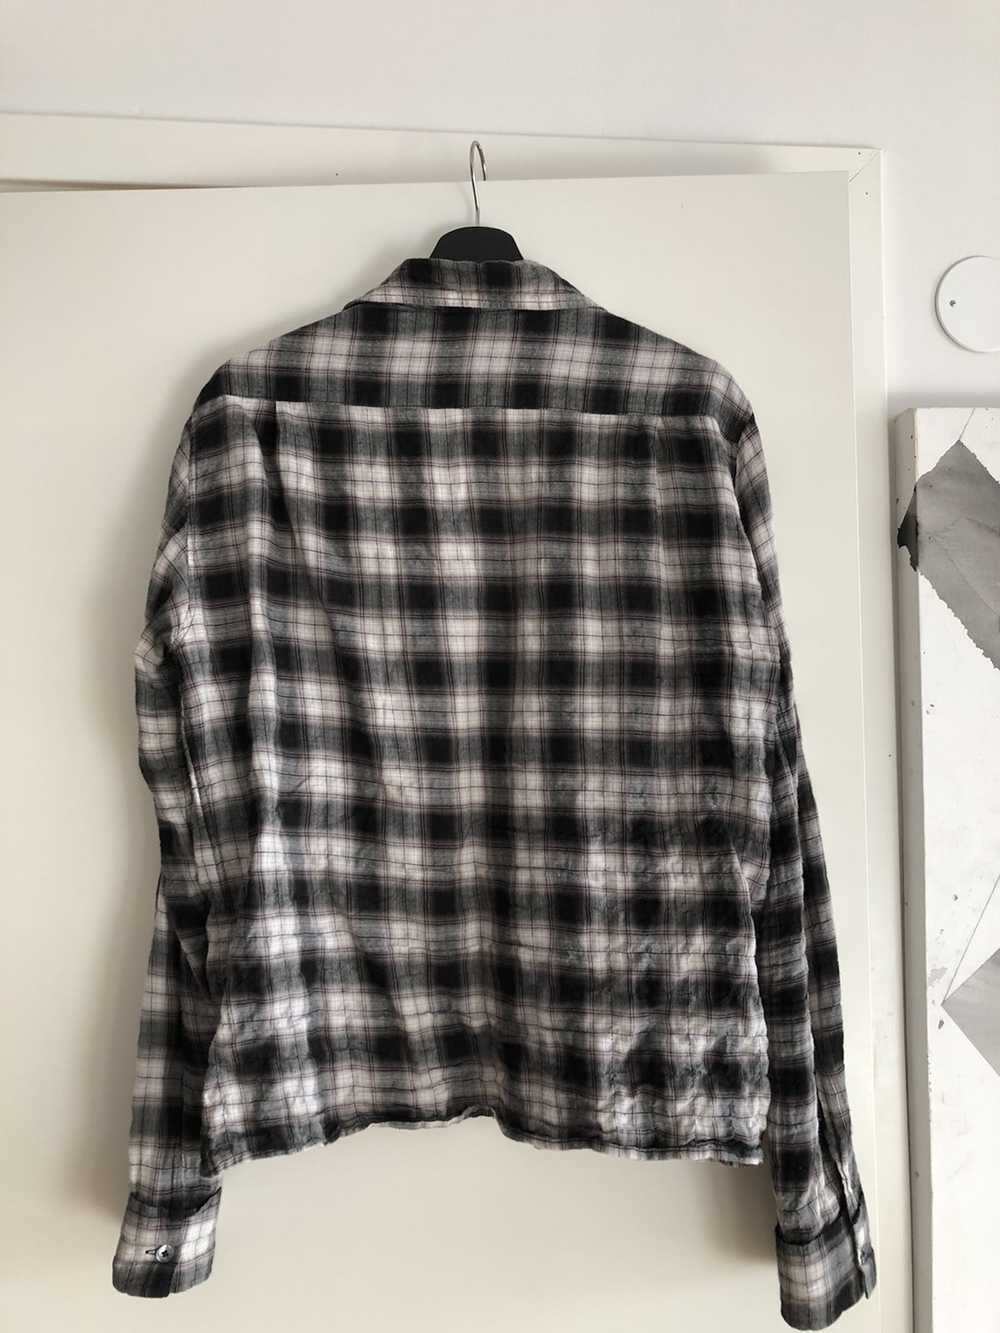 Ann Demeulemeester Archive checked Shirt - image 8